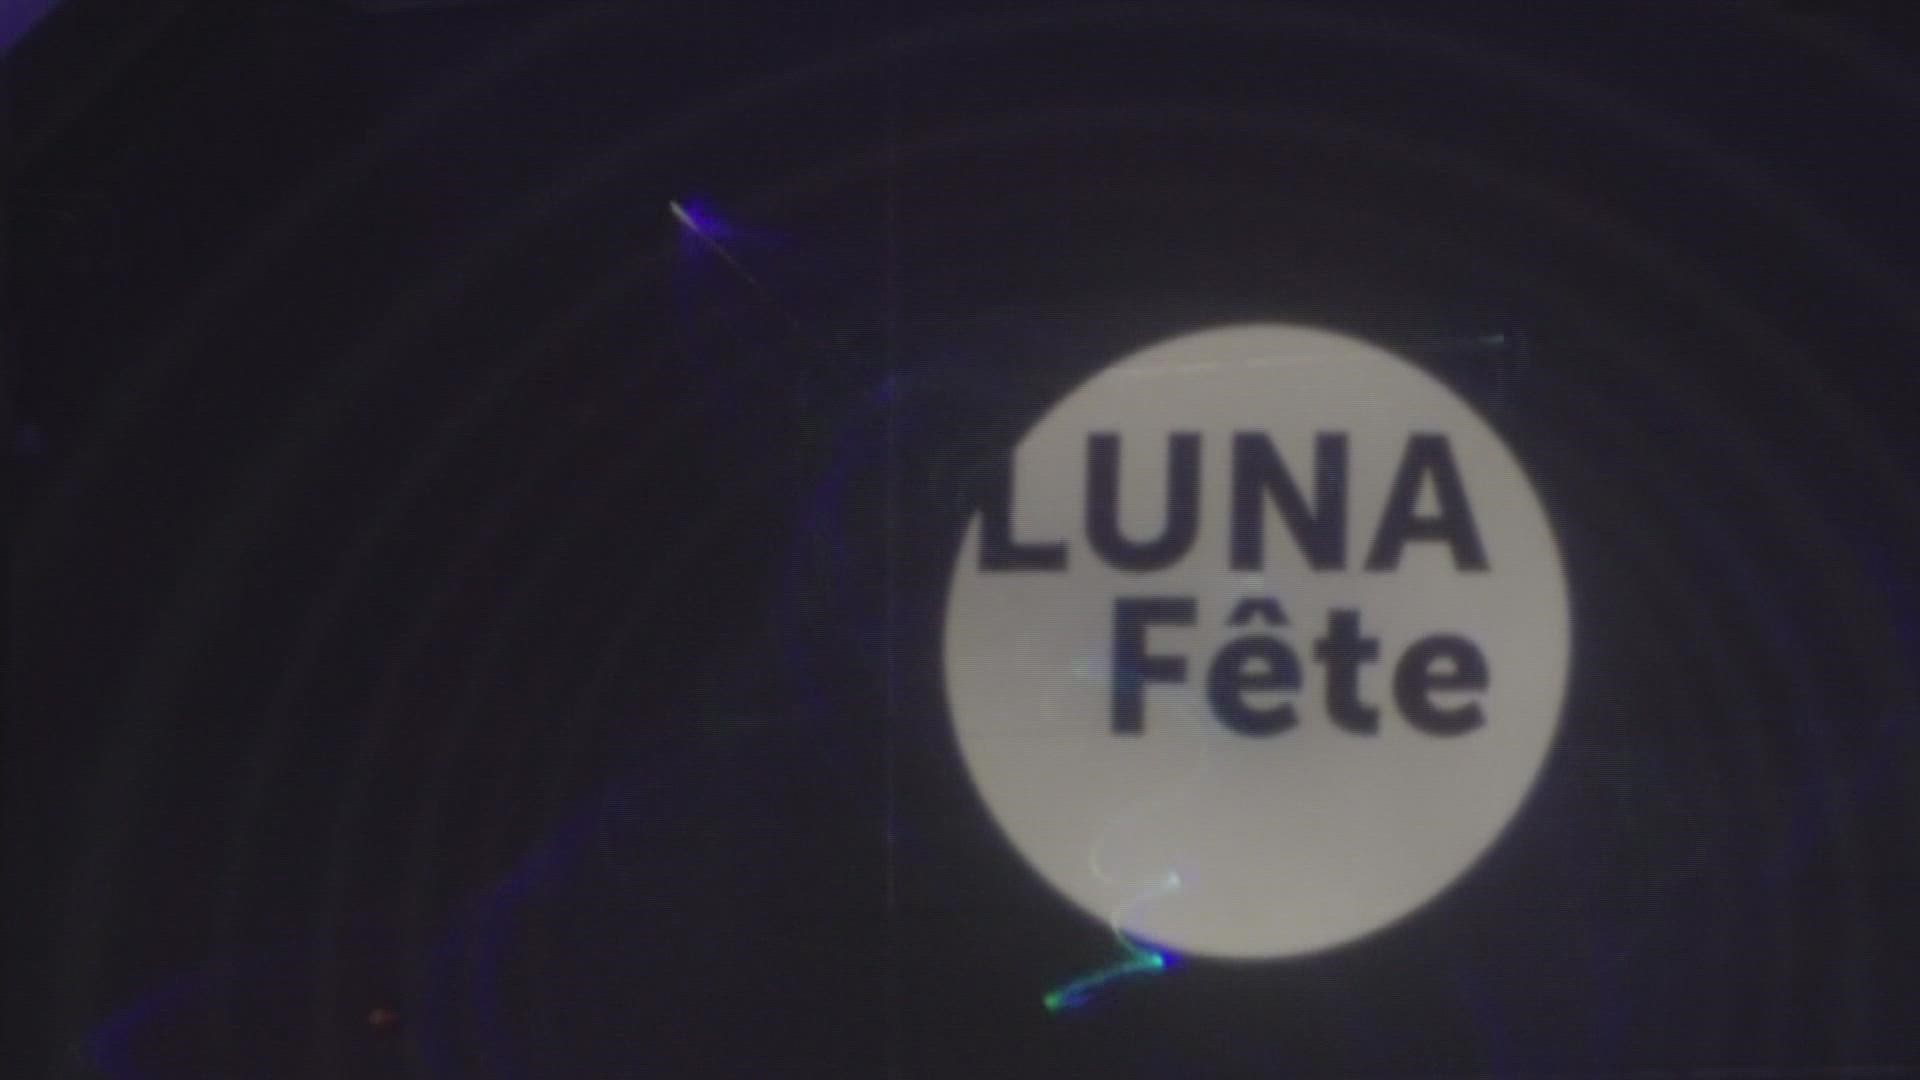 Luna Fete is an annual celebration of light, art, and technology.